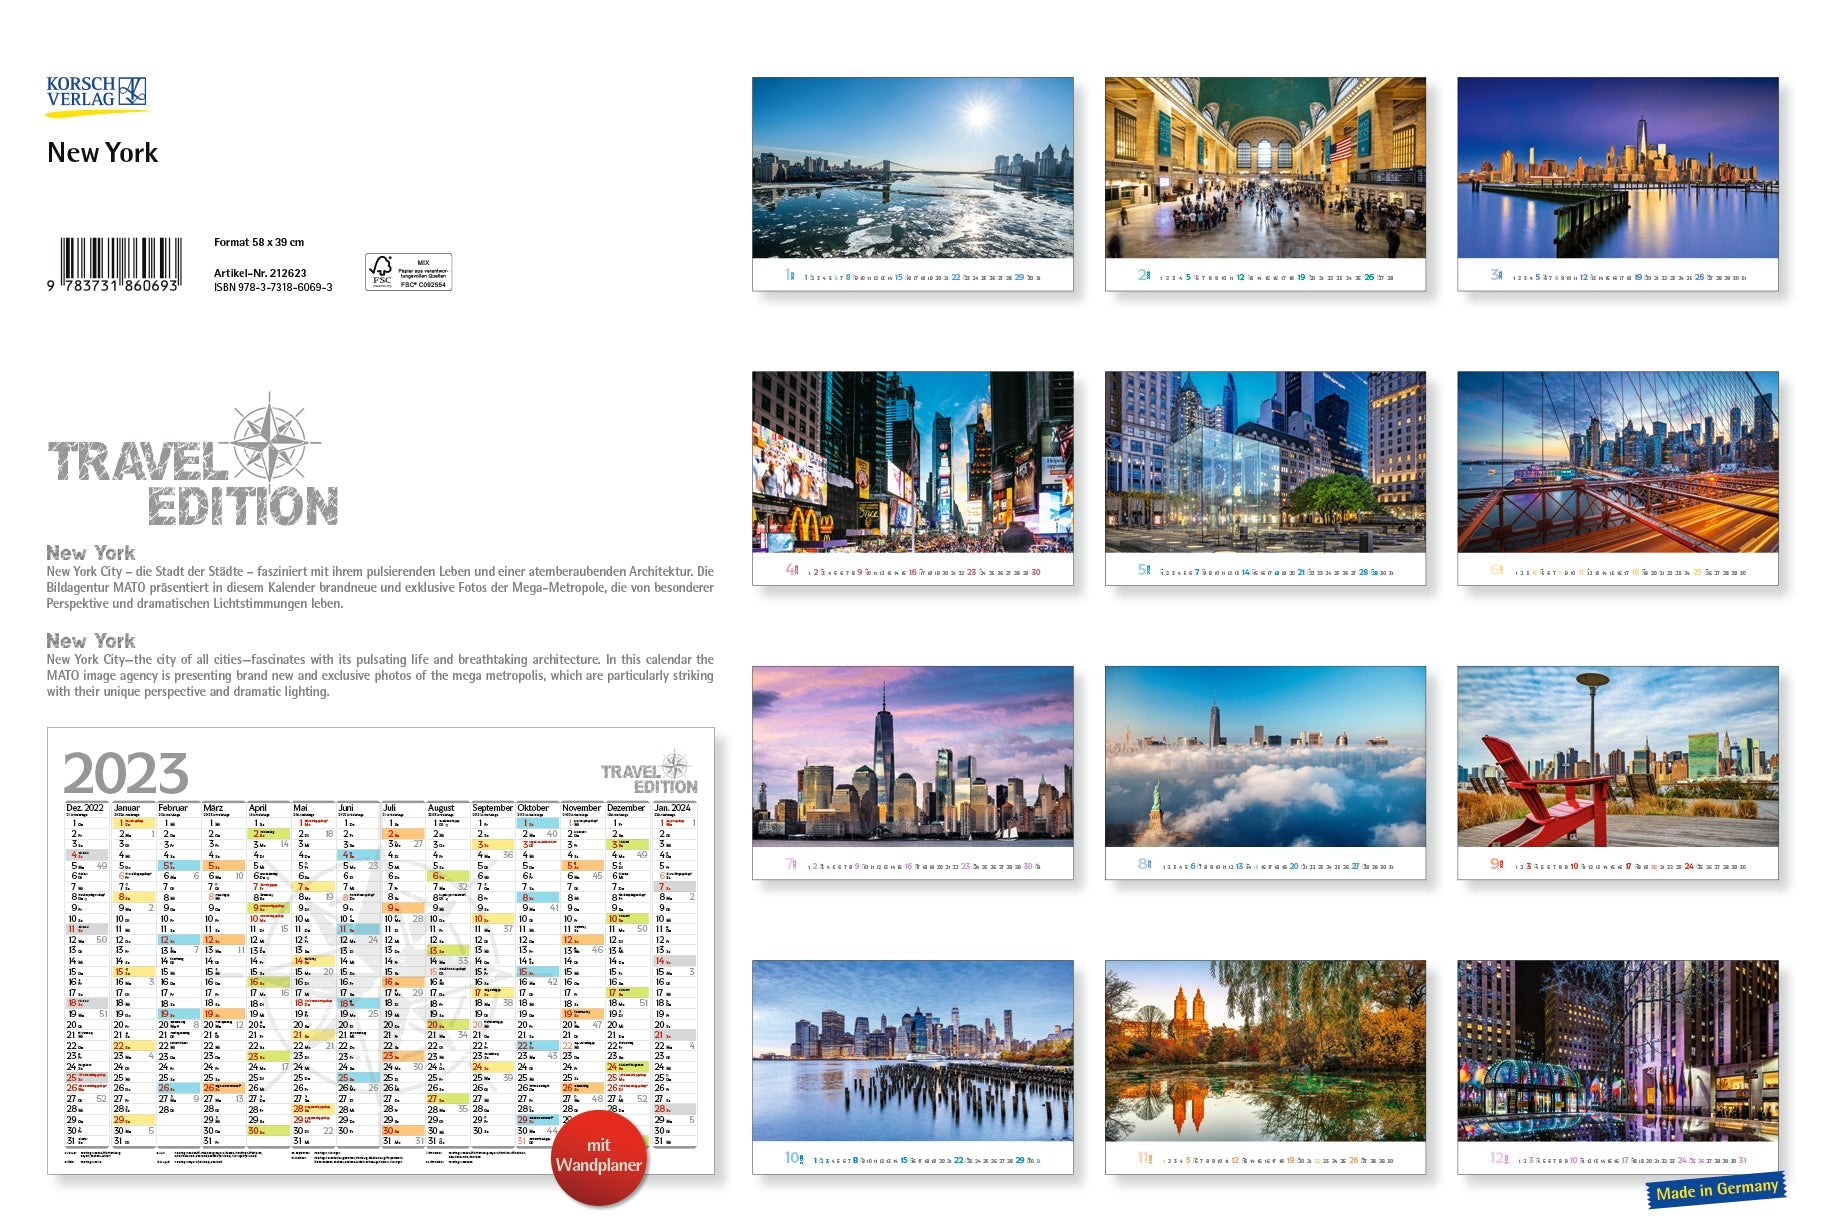 2023 New York (Large) - Deluxe Wall Poster Calendar